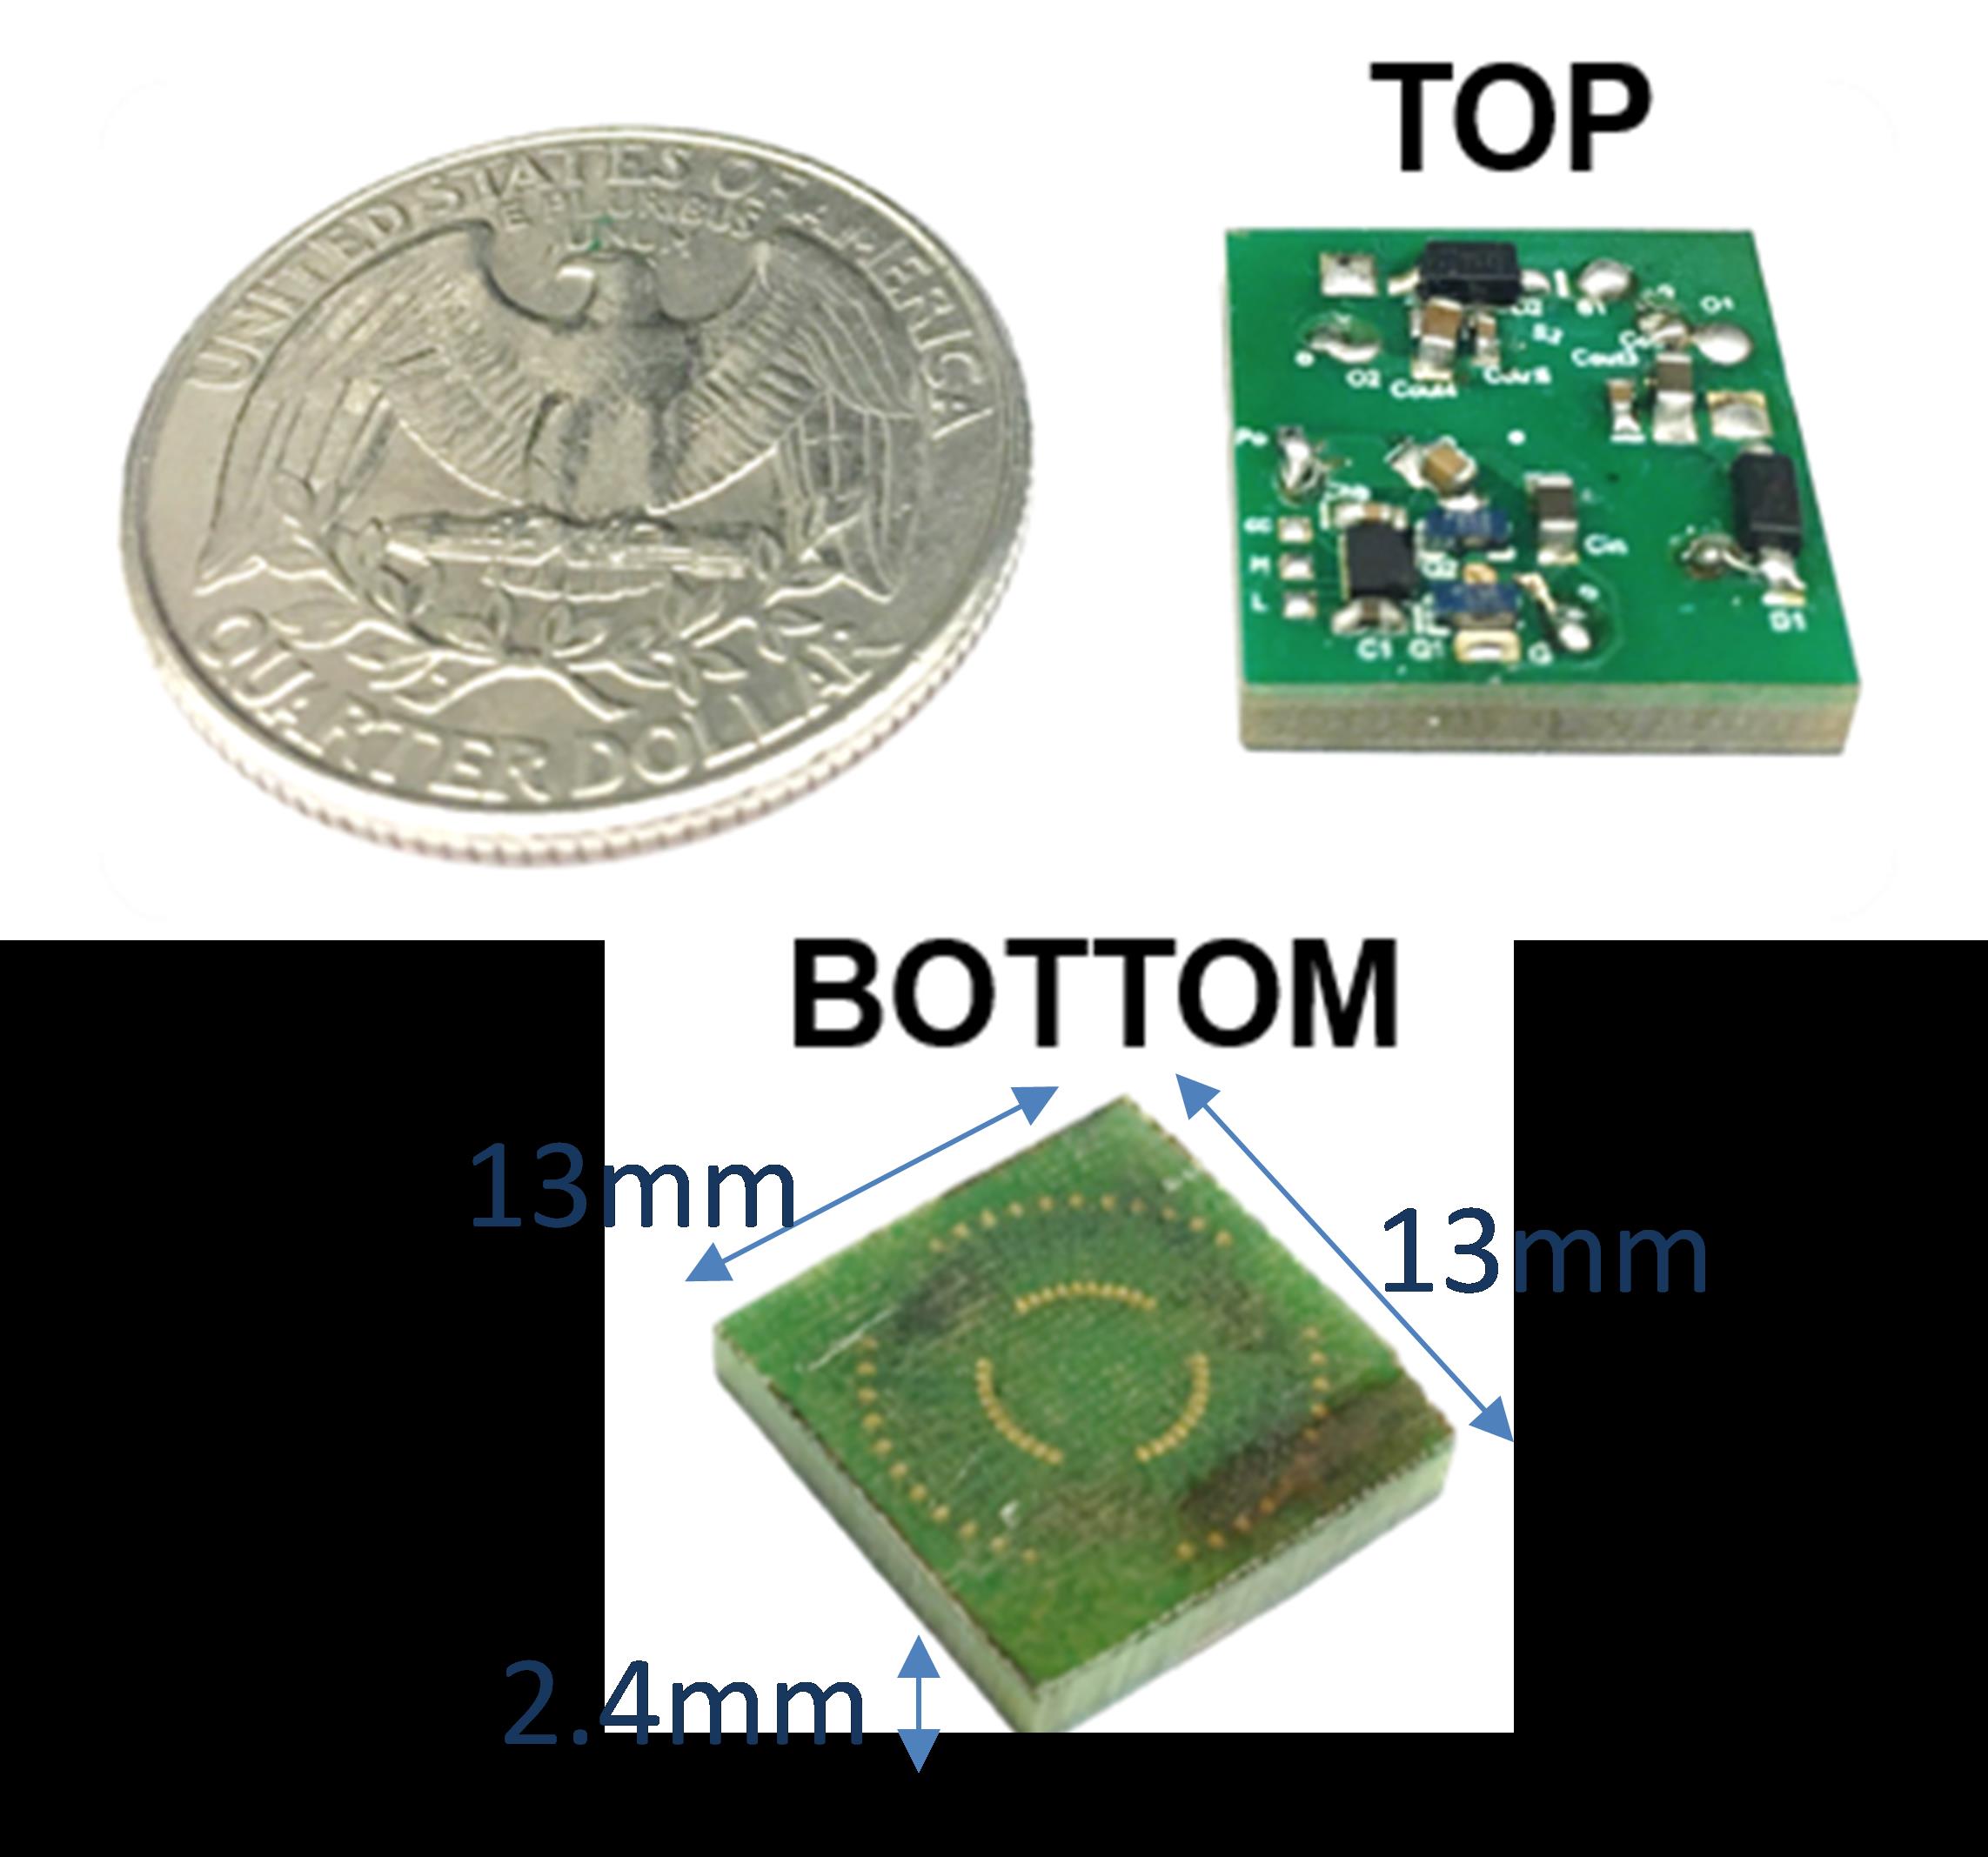 Fully designed PCB shown in relation to a quarter (smaller than)